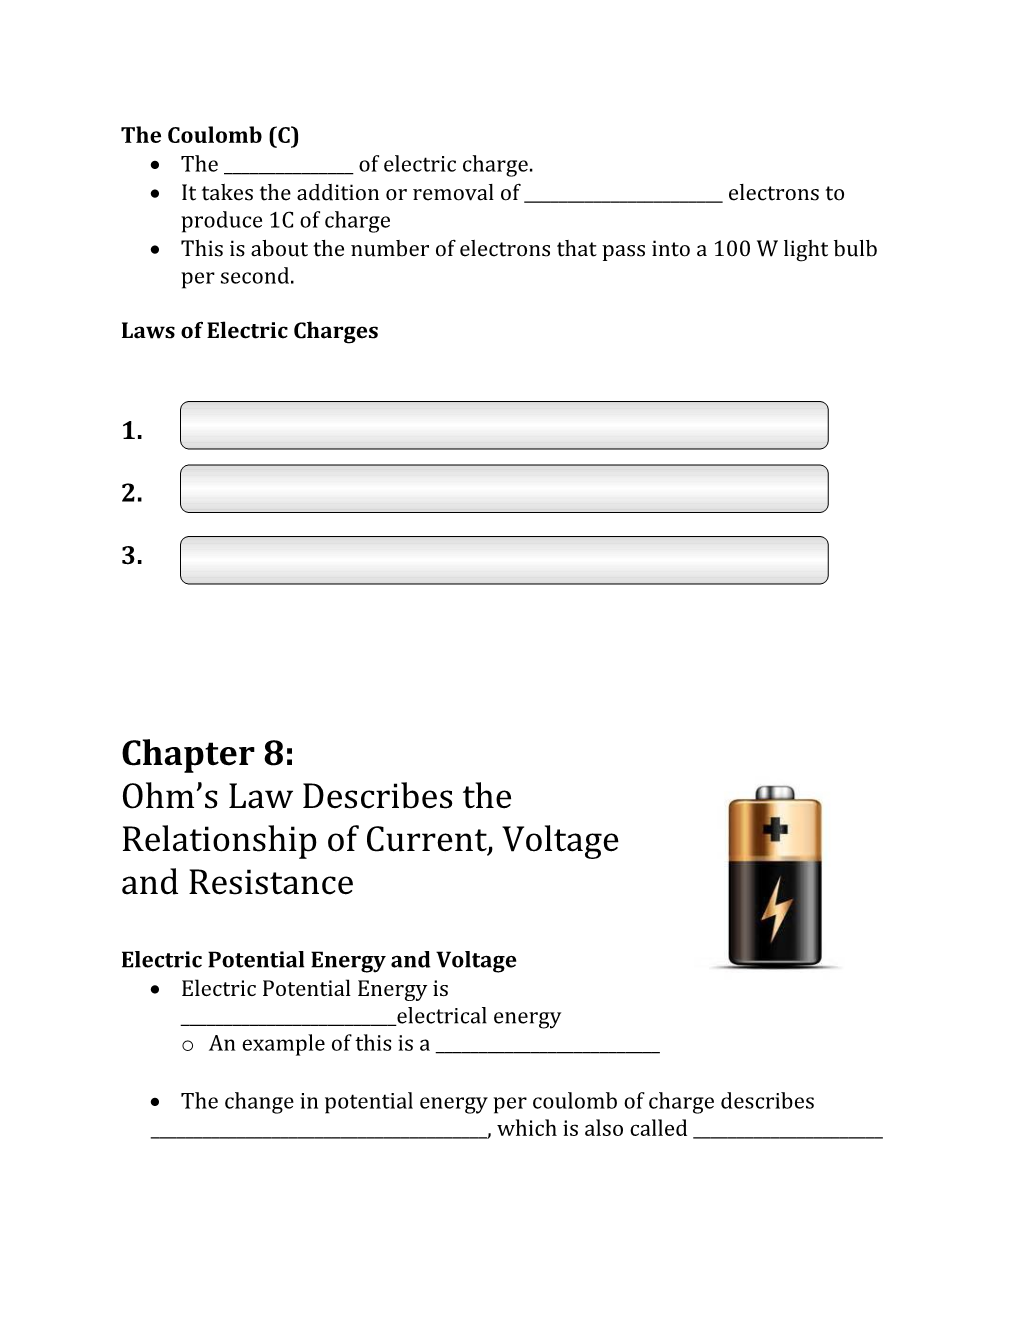 Unit 3 Booklet: Characteristics of Electricity